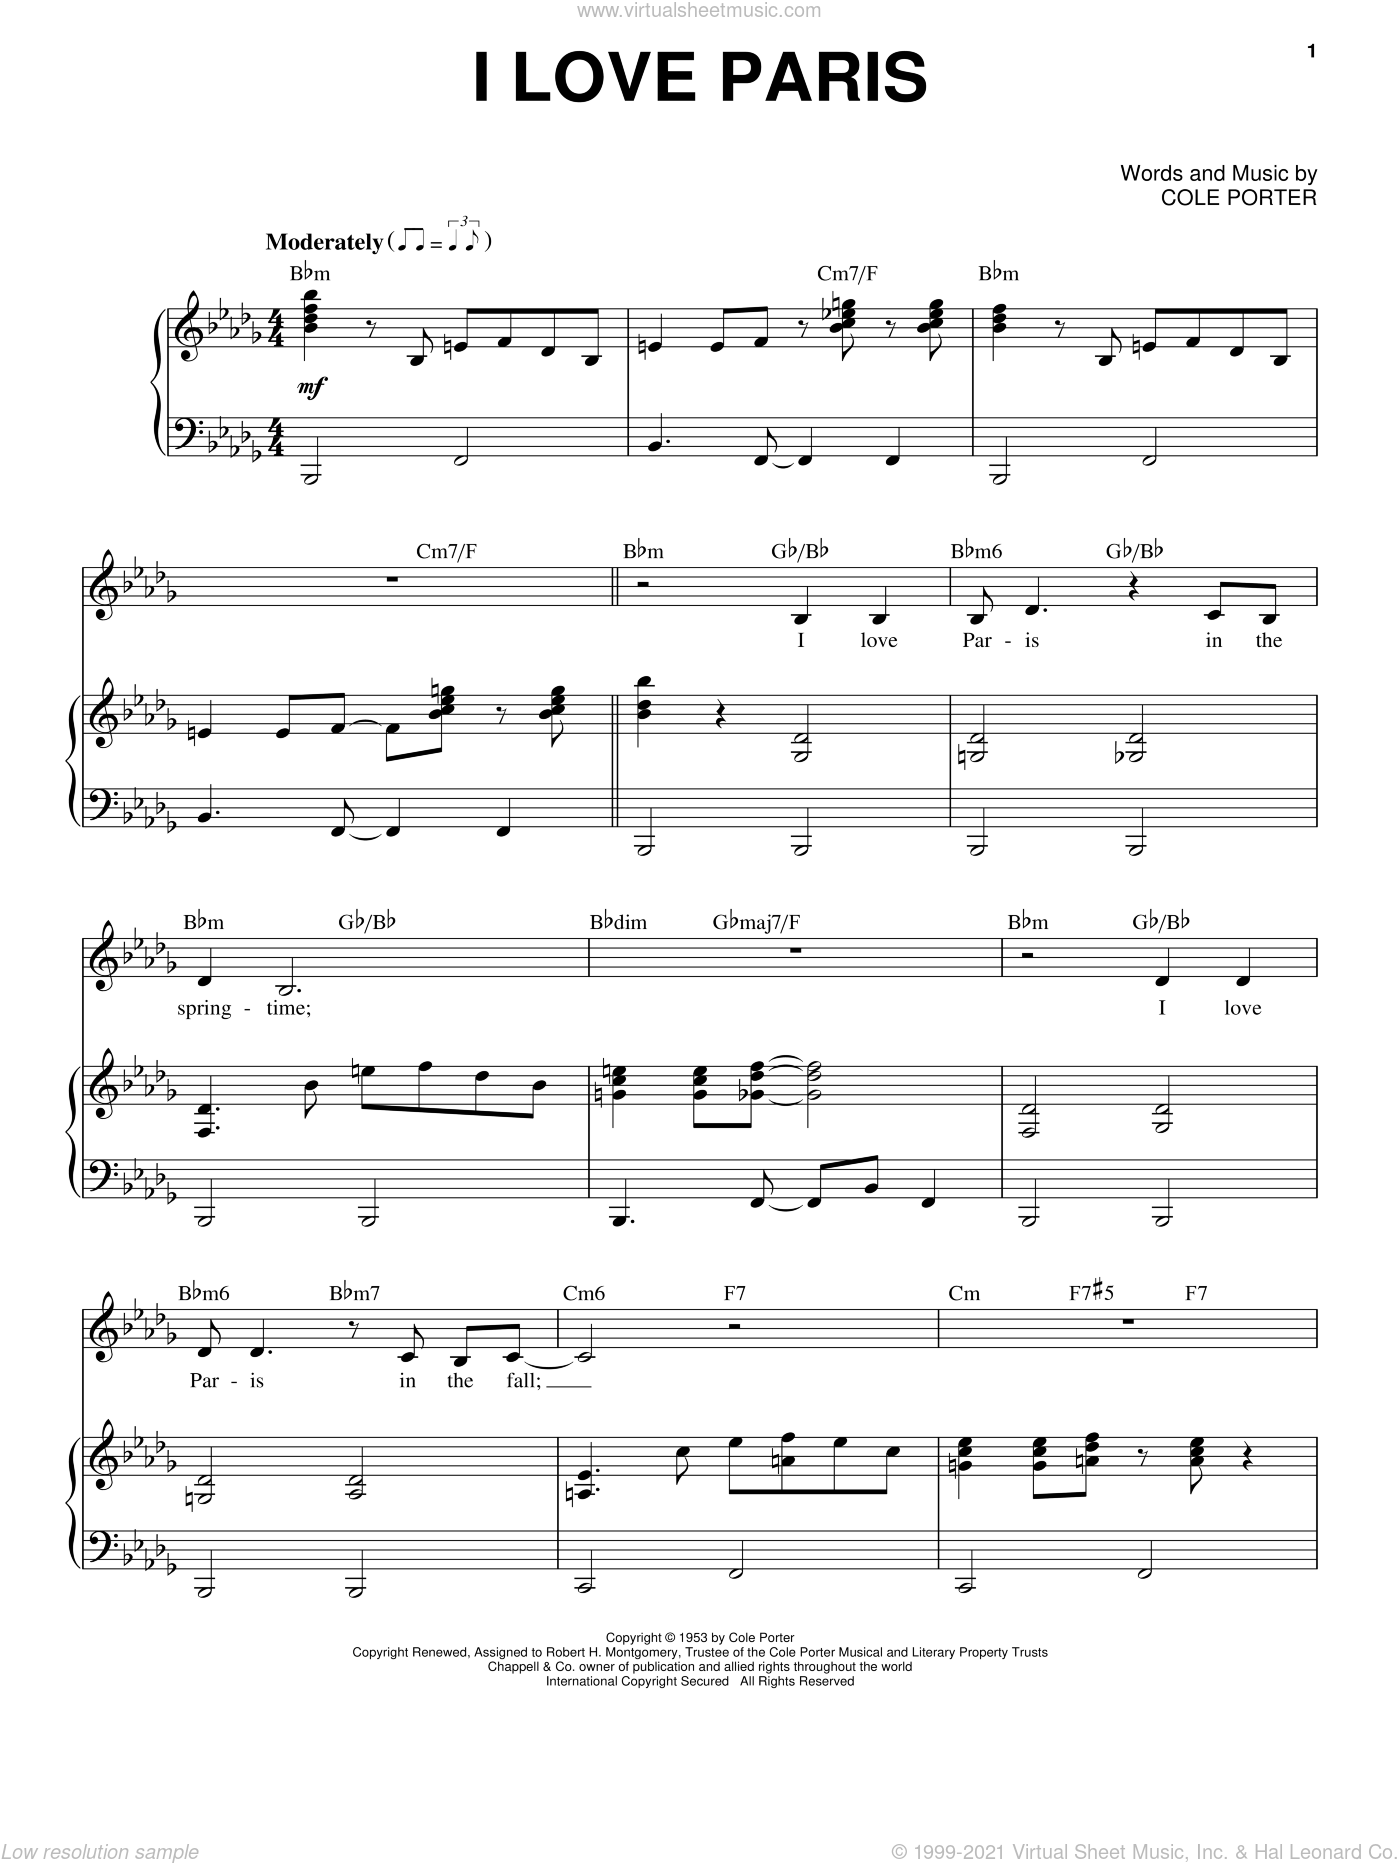 Sinatra - I Love Paris sheet music for voice and piano [PDF]1400 x 1864